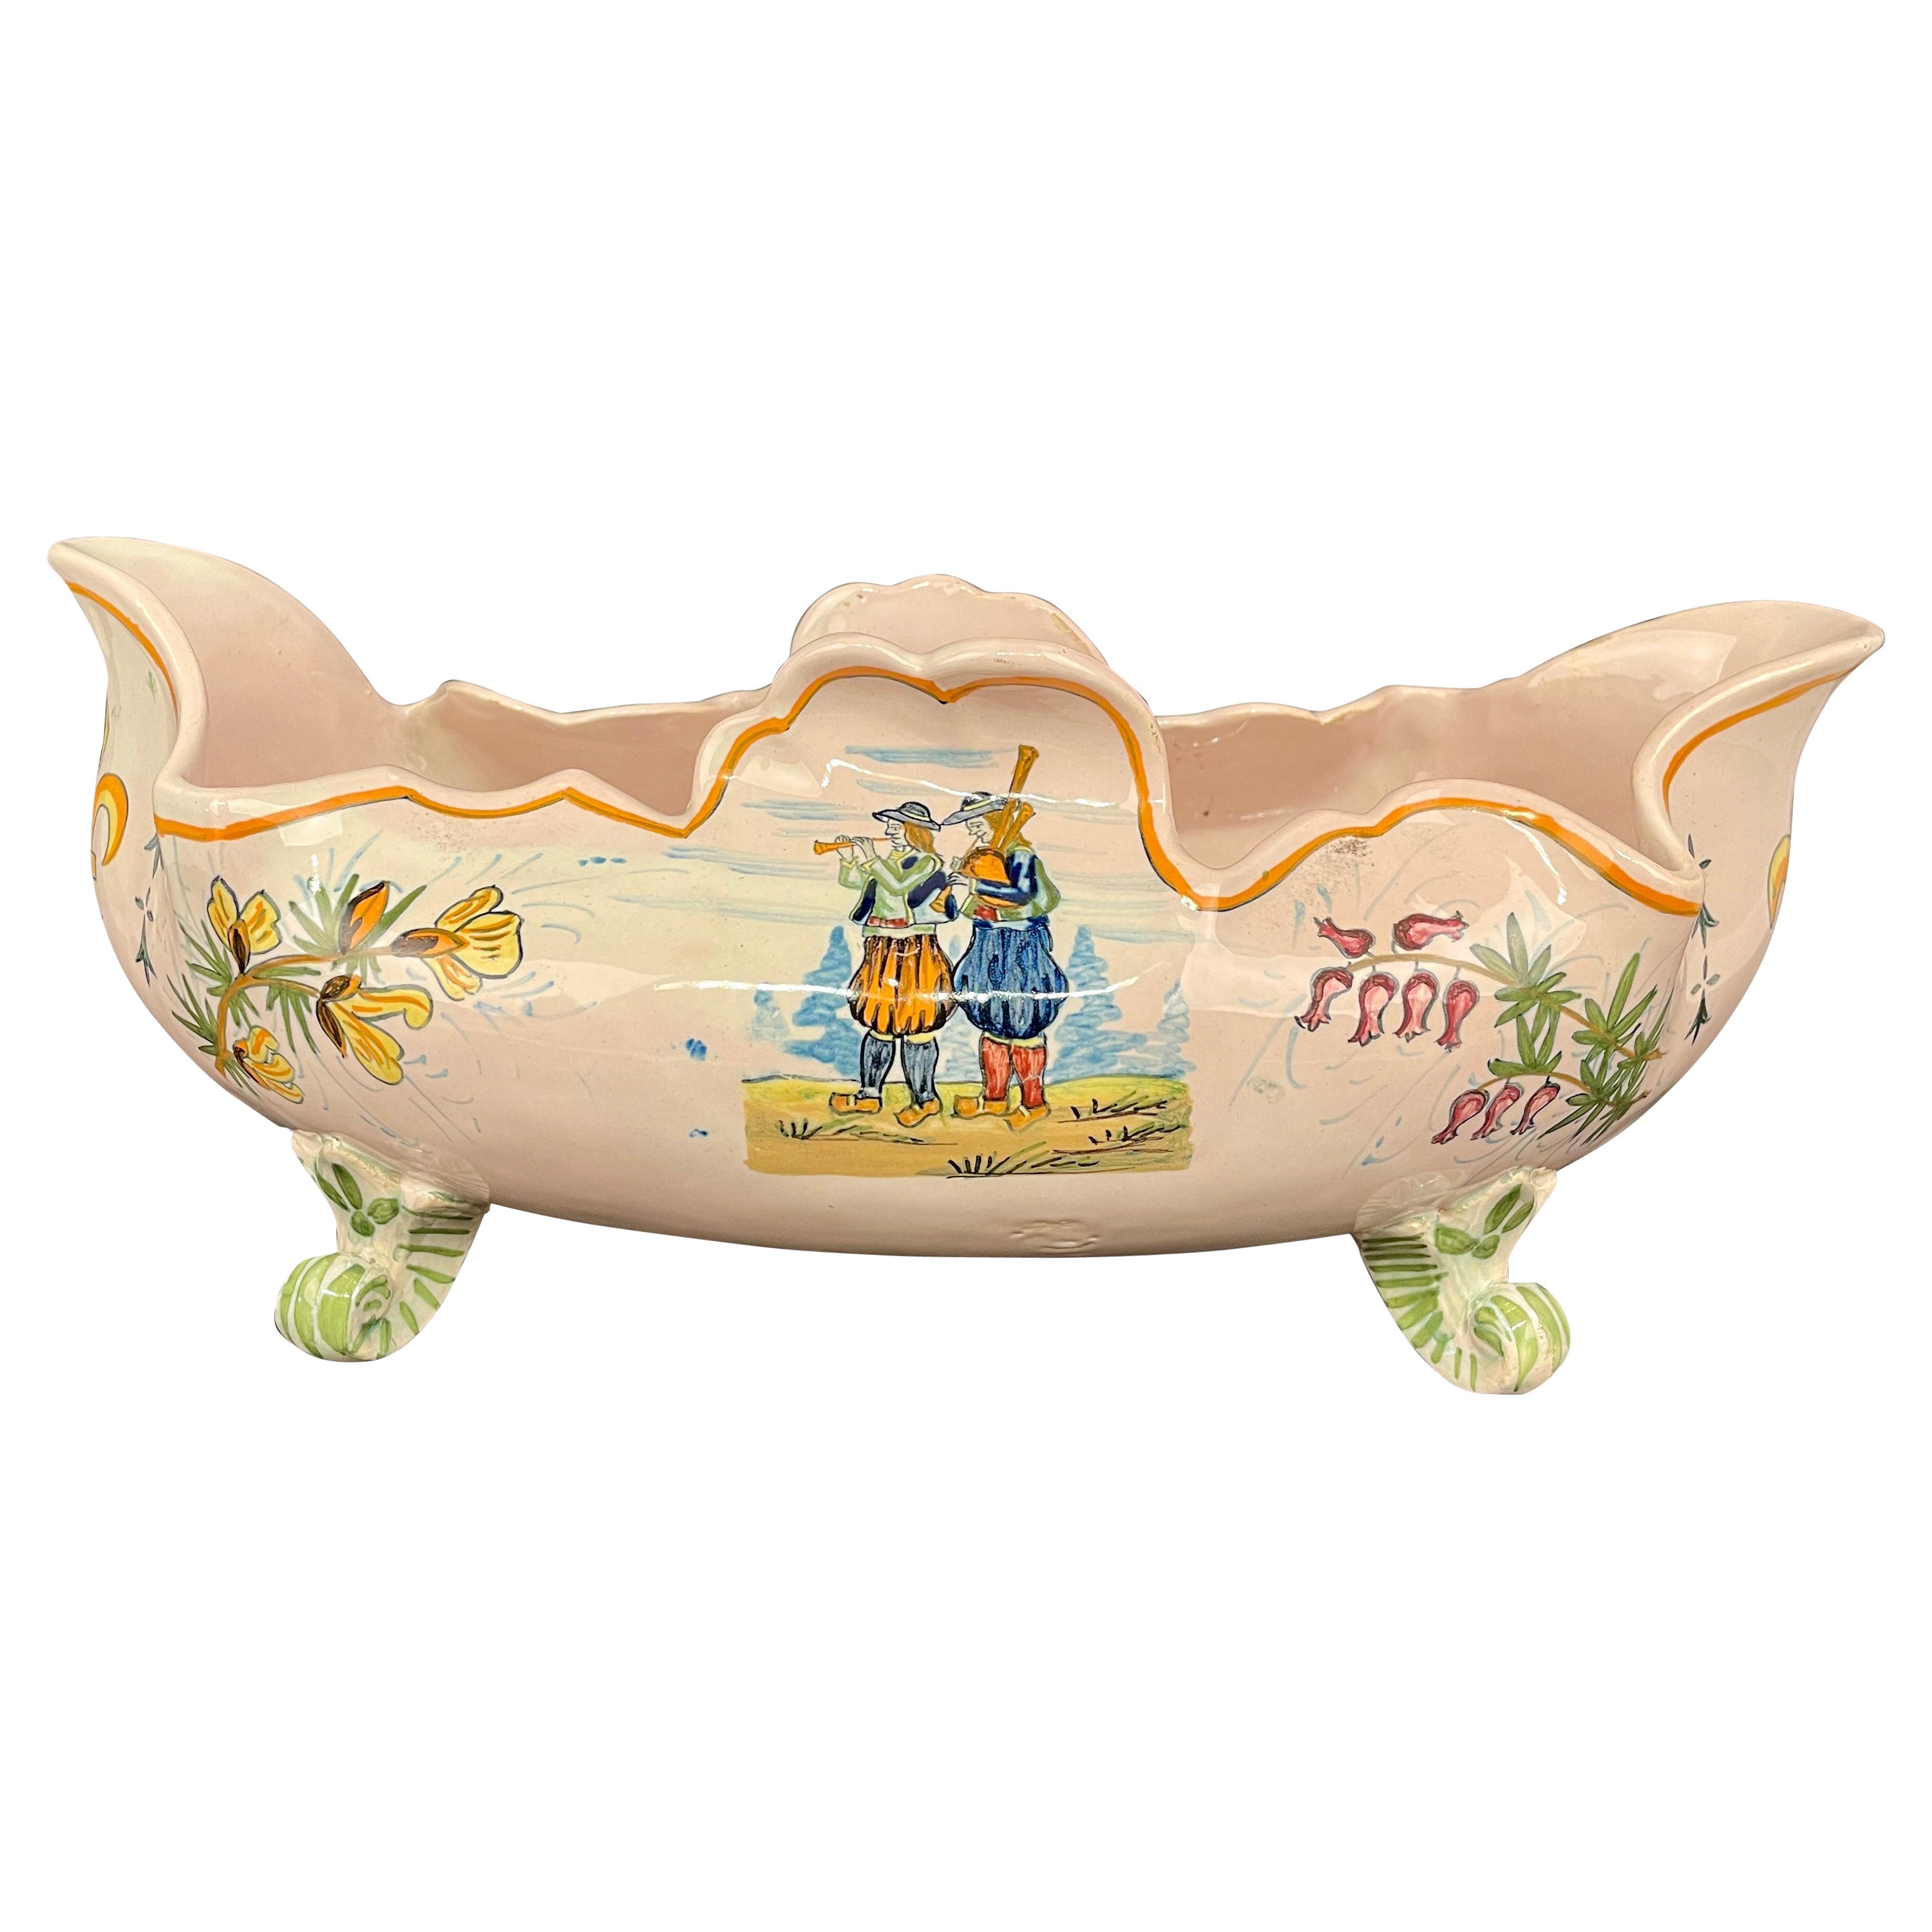 Henriot Quimper Faience Footed Jardiniere For Sale